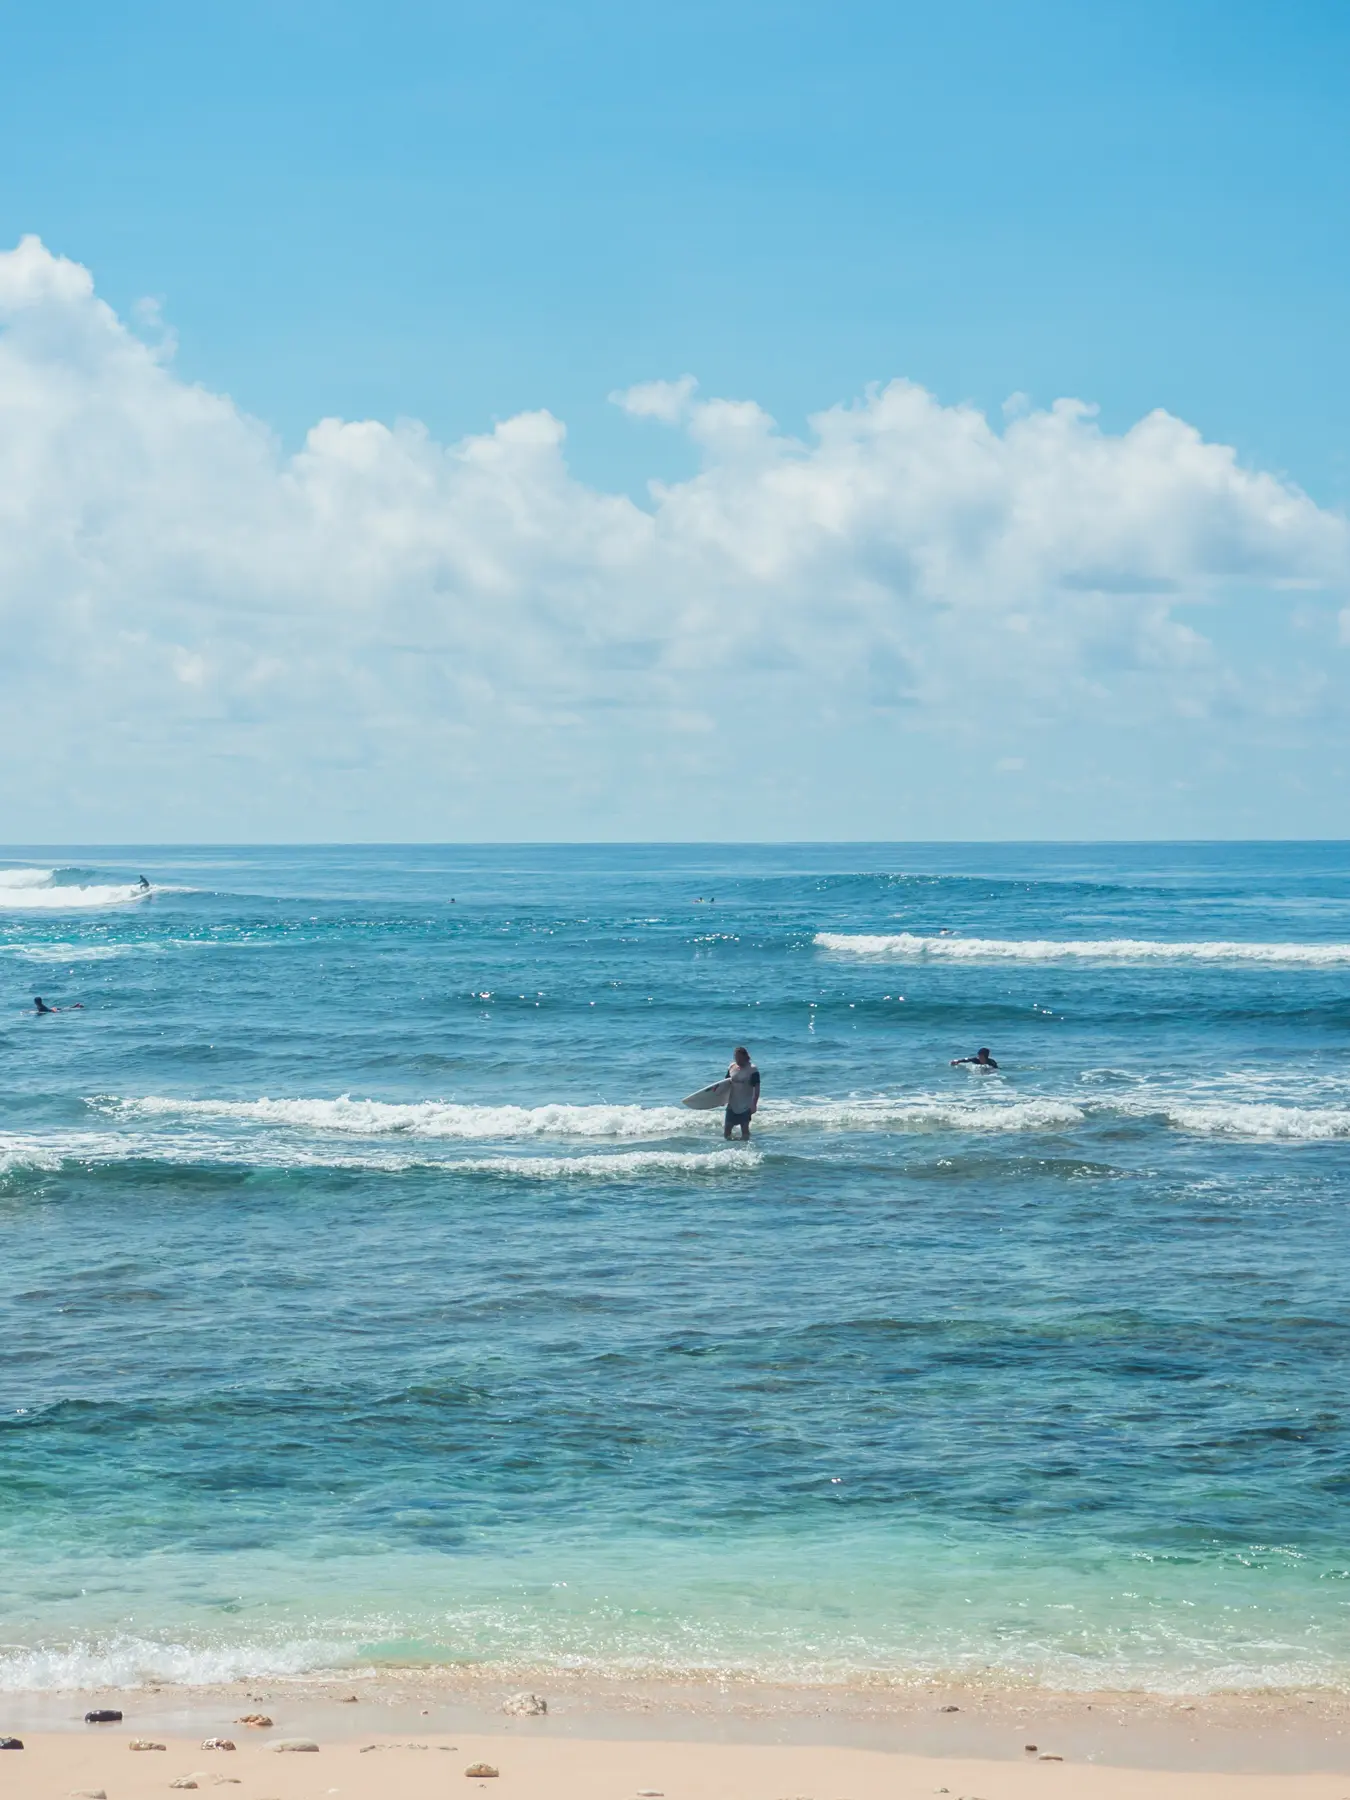 Surfer holding a surfboard walking up from the turquoise water on a sunny day at Green Bowl Beach in Bali.